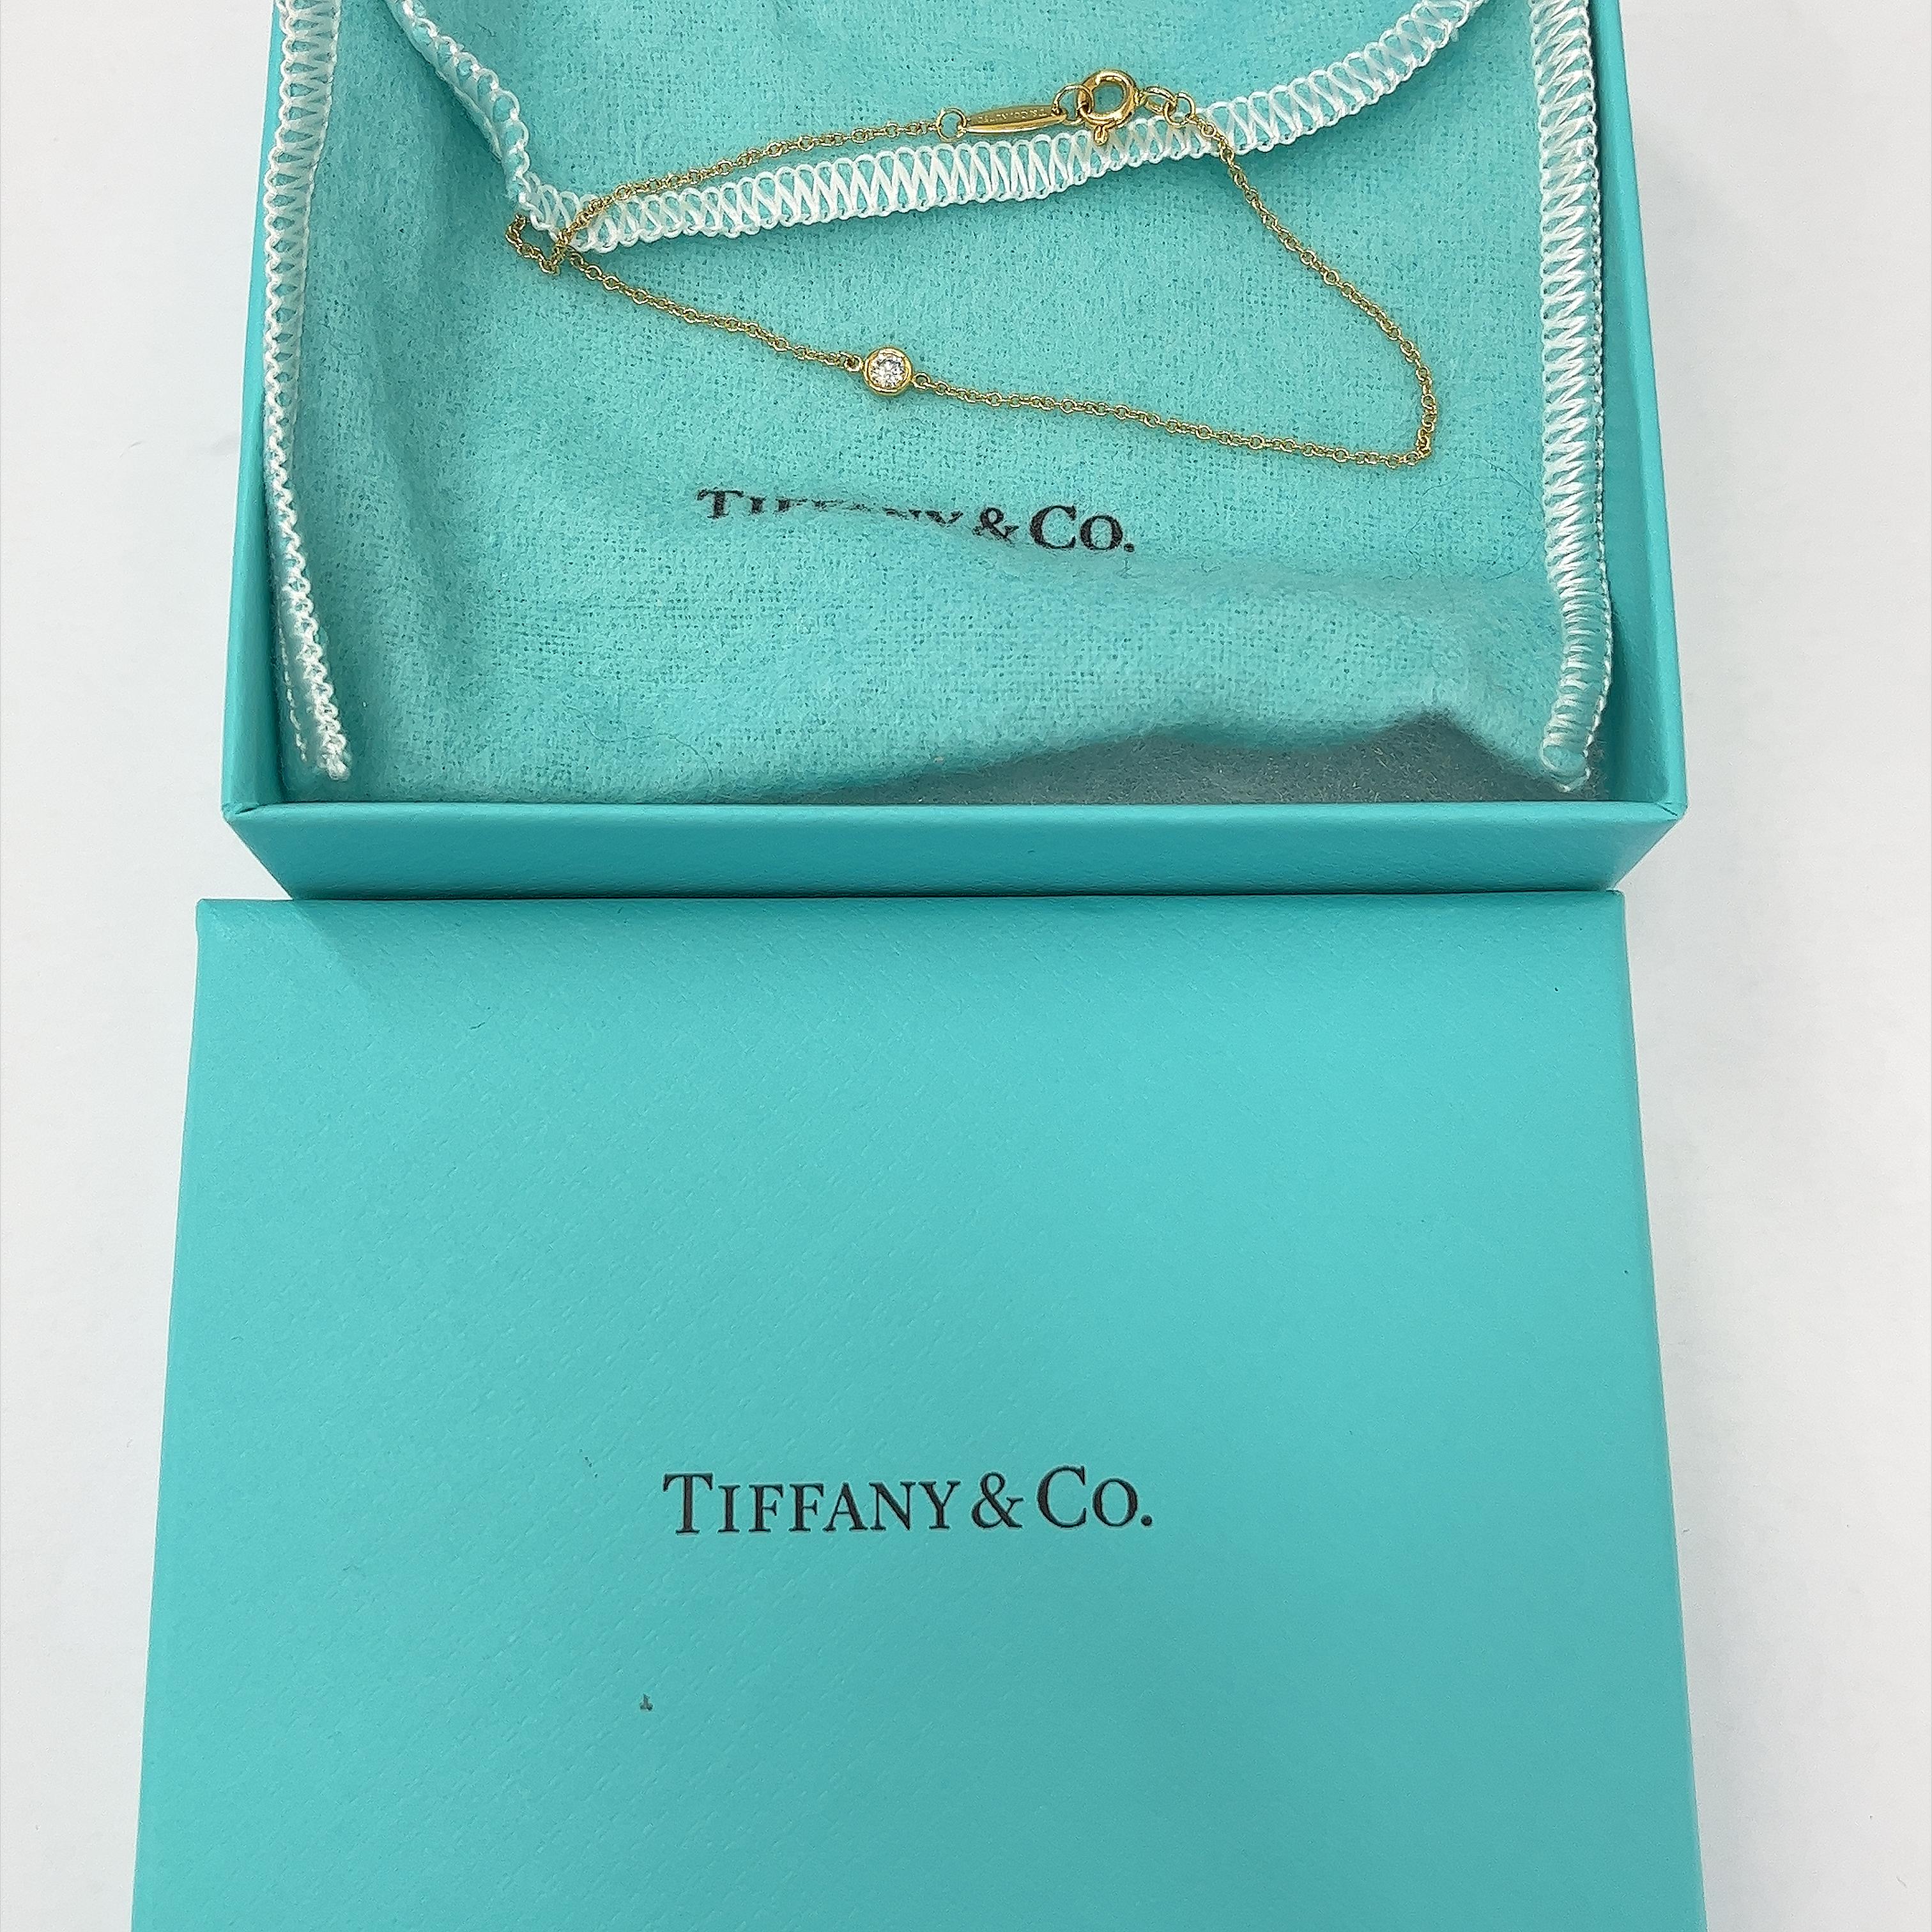 Elevate your elegance with the Tiffany & Co. Elsa Peretti Diamonds by the Yard Single Diamond Necklace in 18ct Yellow Gold. This exquisite piece features a single radiant diamond suspended from a delicate chain, designed by Elsa Peretti. Crafted